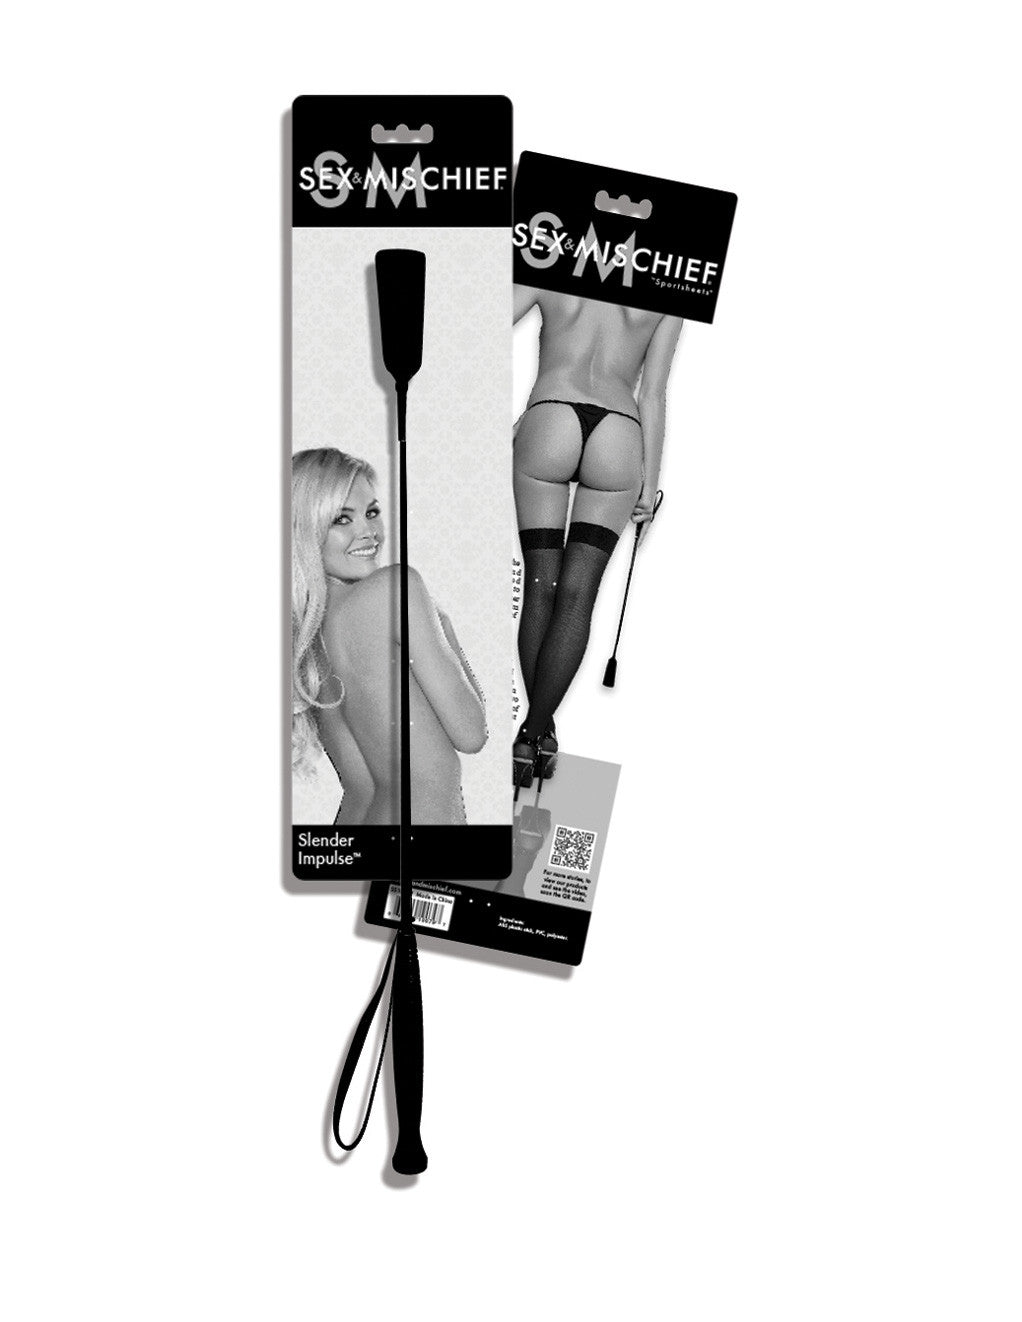 Sportsheets Sex & Mischief Baby Paddle Fetish Whips Crops & Paddles 12in